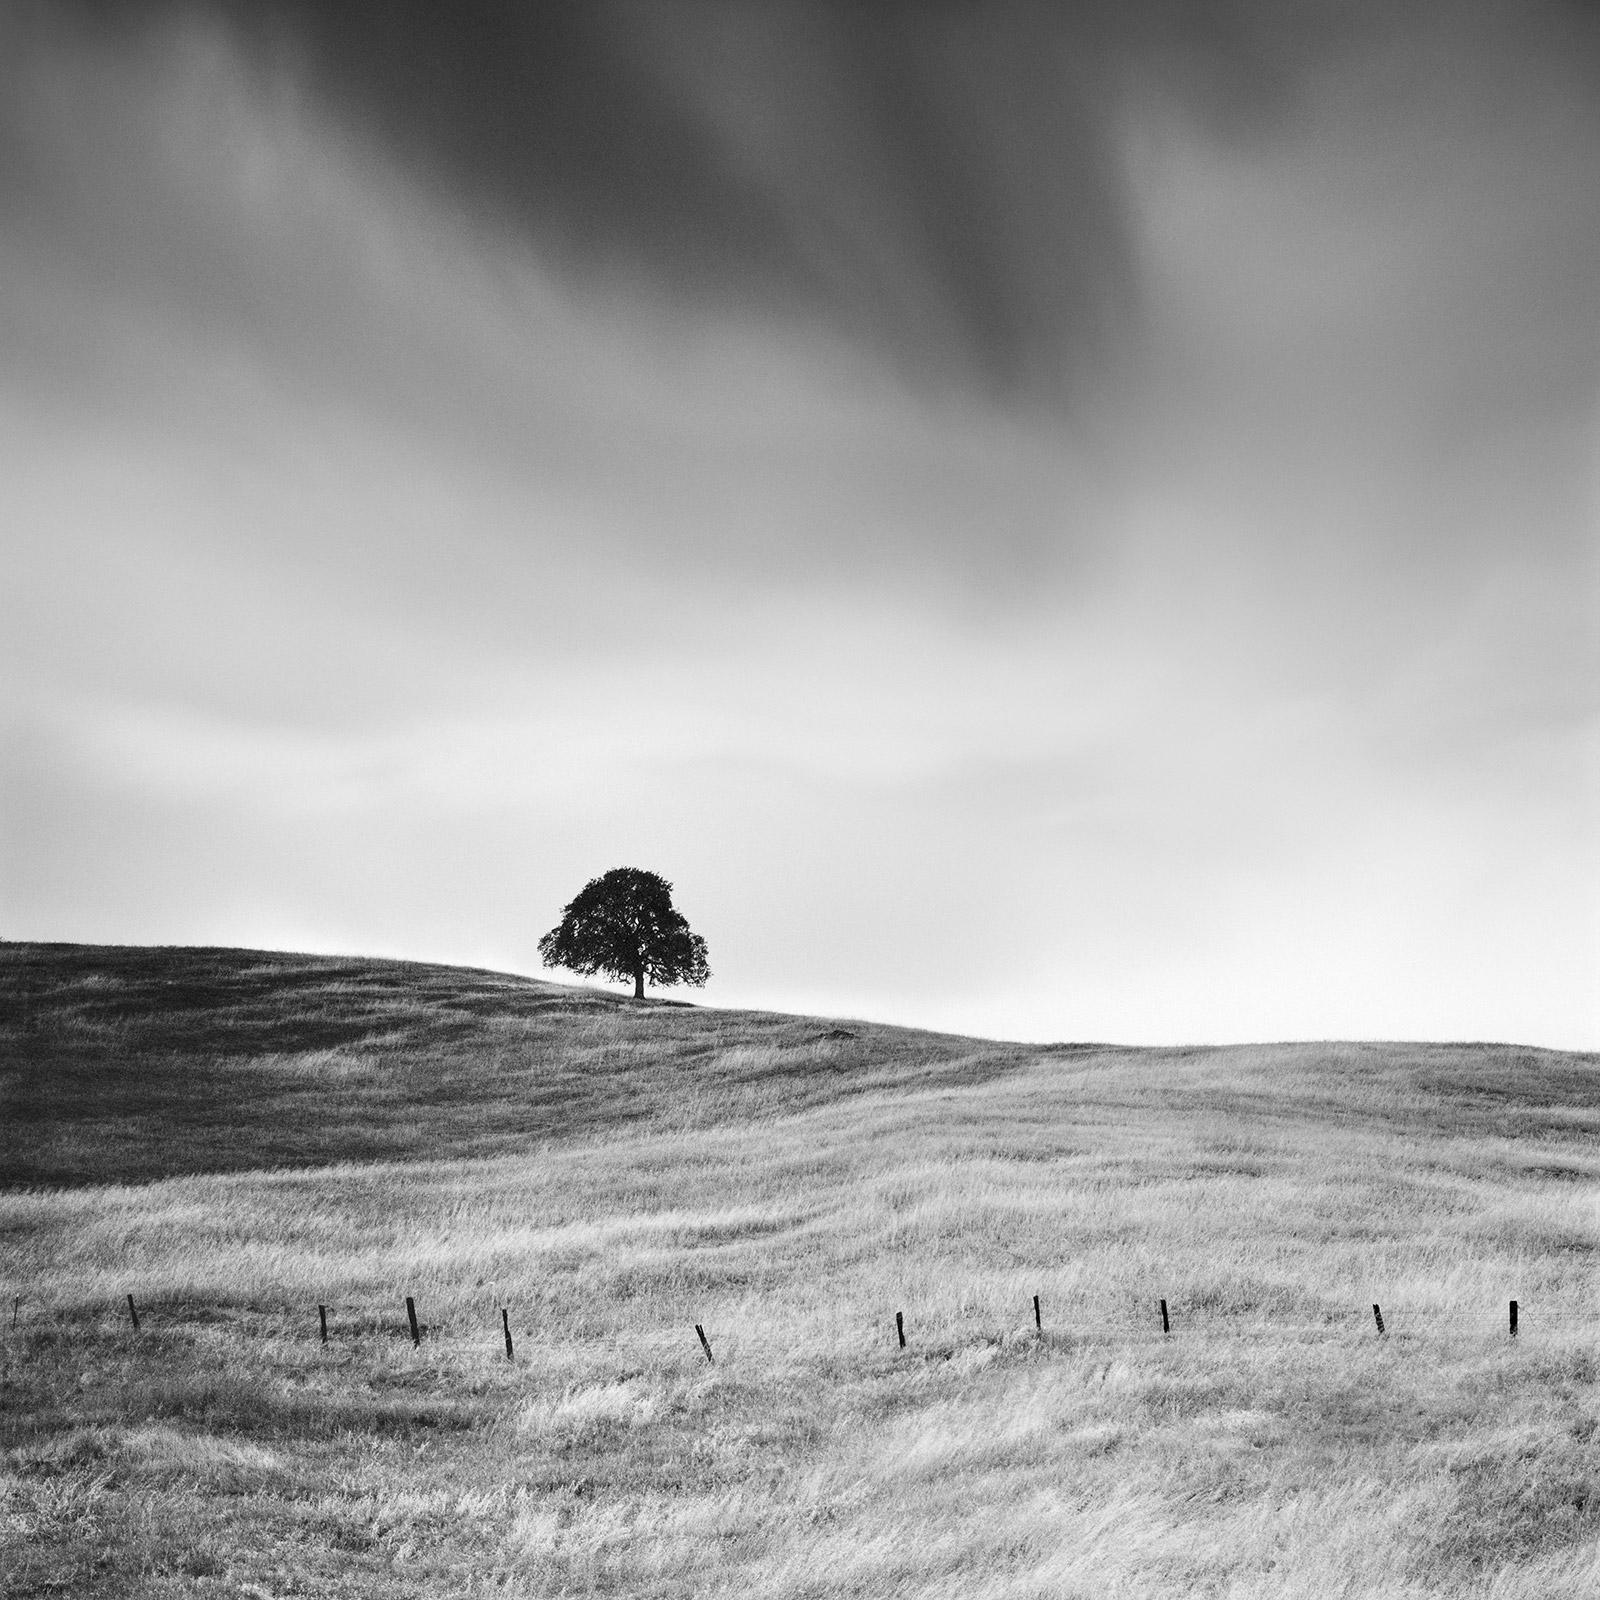 The tree in the golden grass California USA black white art landscape photography